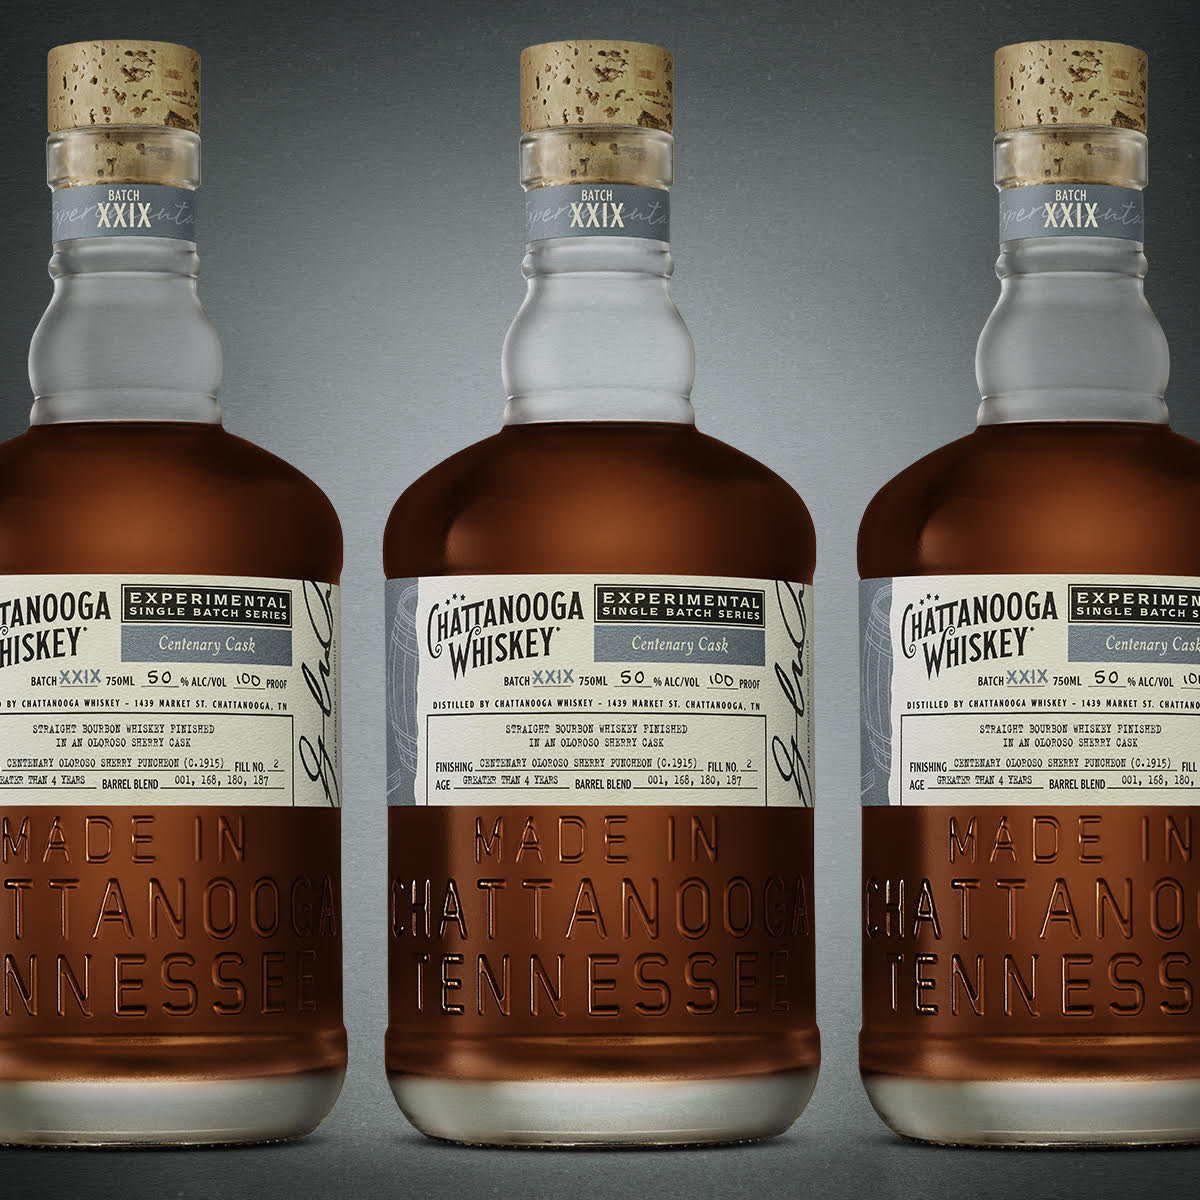 The Bourbon Review: LIMITED EDITION Chattanooga Whiskey’s ‘Silver Oak Cabernet Cask Finish’ & ‘Experimental Batch XXIX’